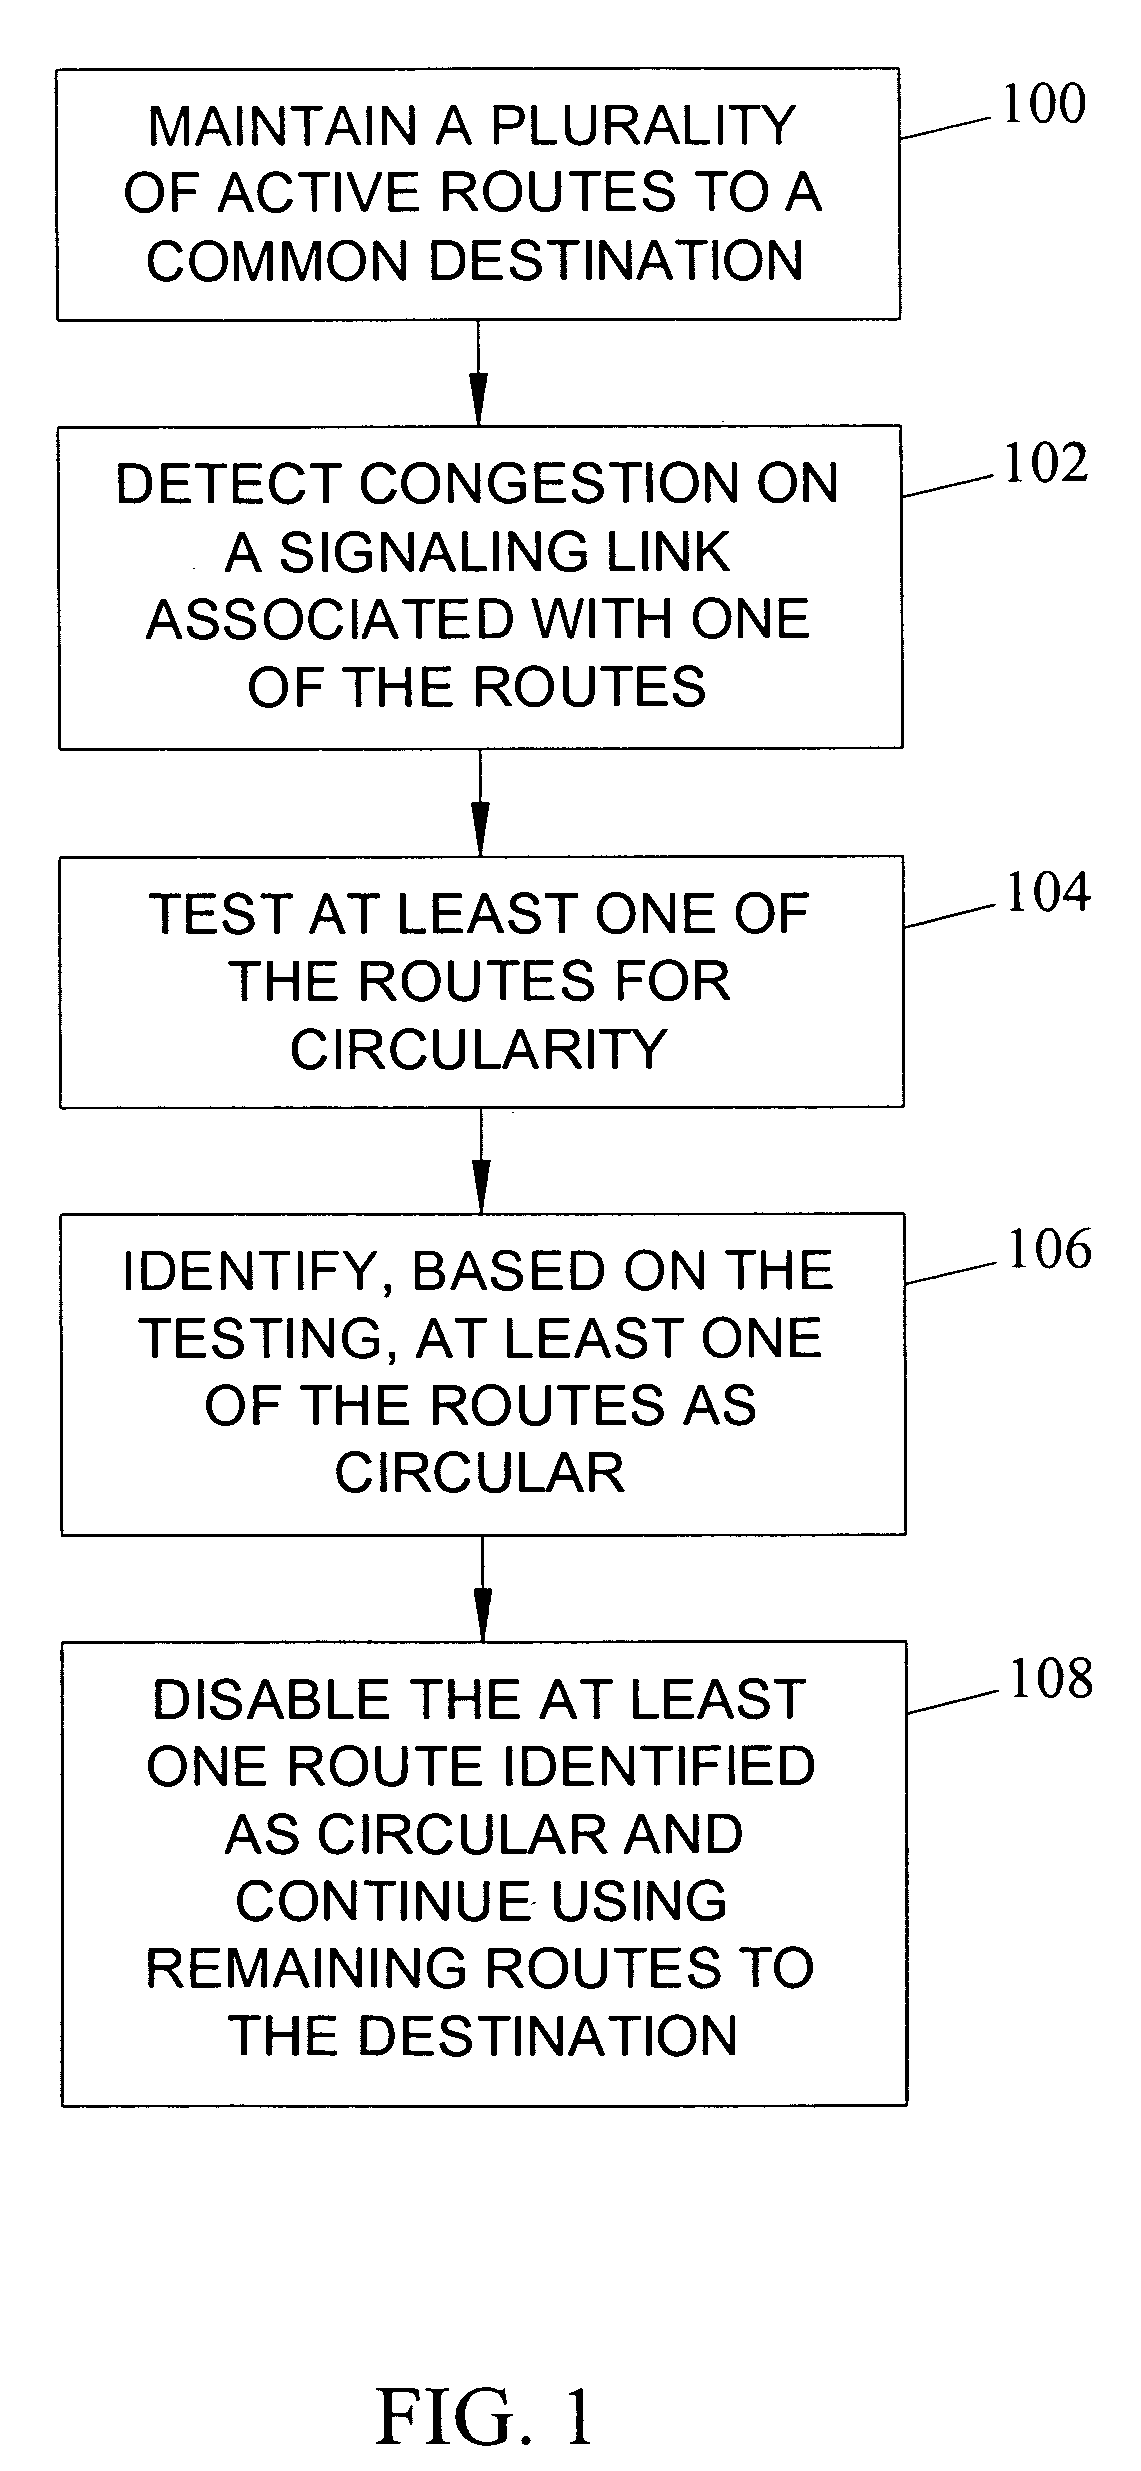 Methods, systems and computer program products for individually identifying and disabling circular routes from a plurality of active routes to a common destination